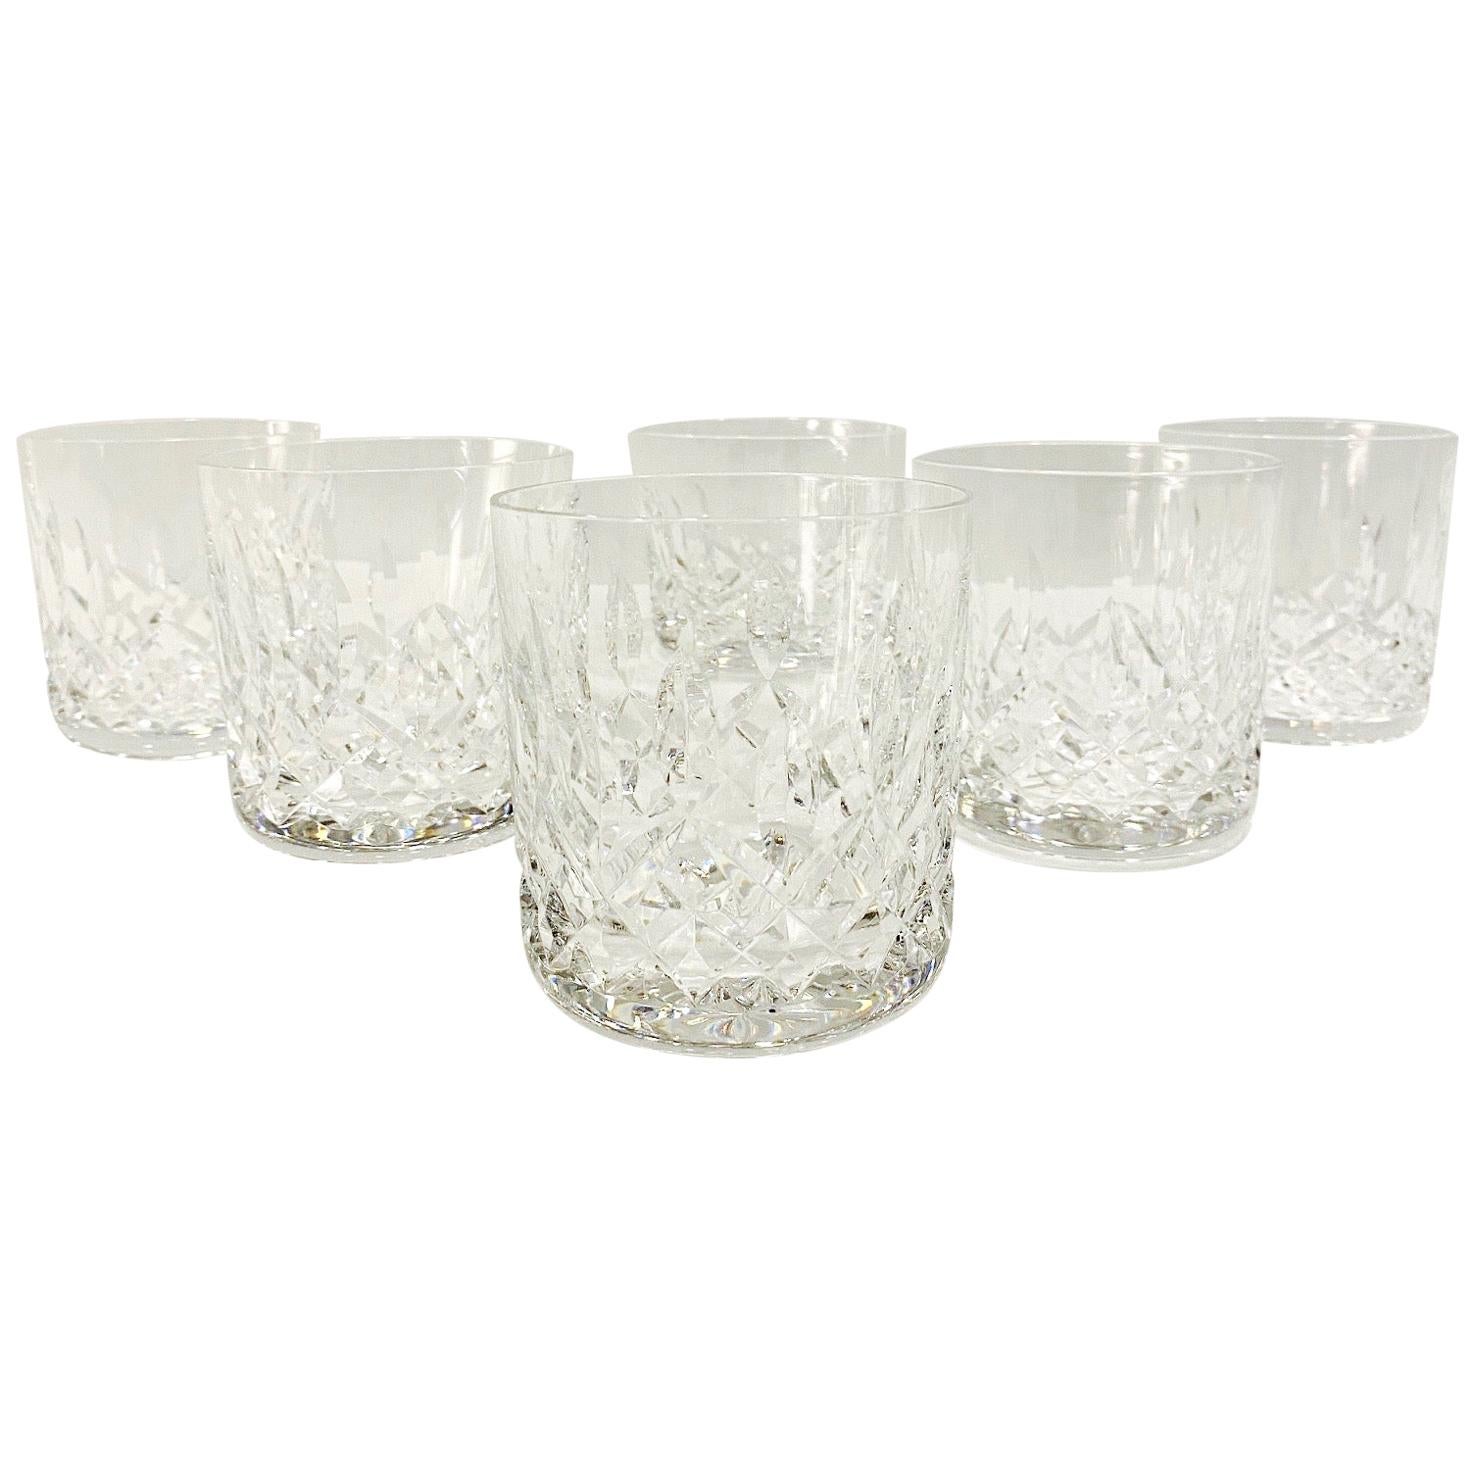 Set of Six Vintage Waterford Crystal Old Fashioned Glasses, Germany, circa 1995